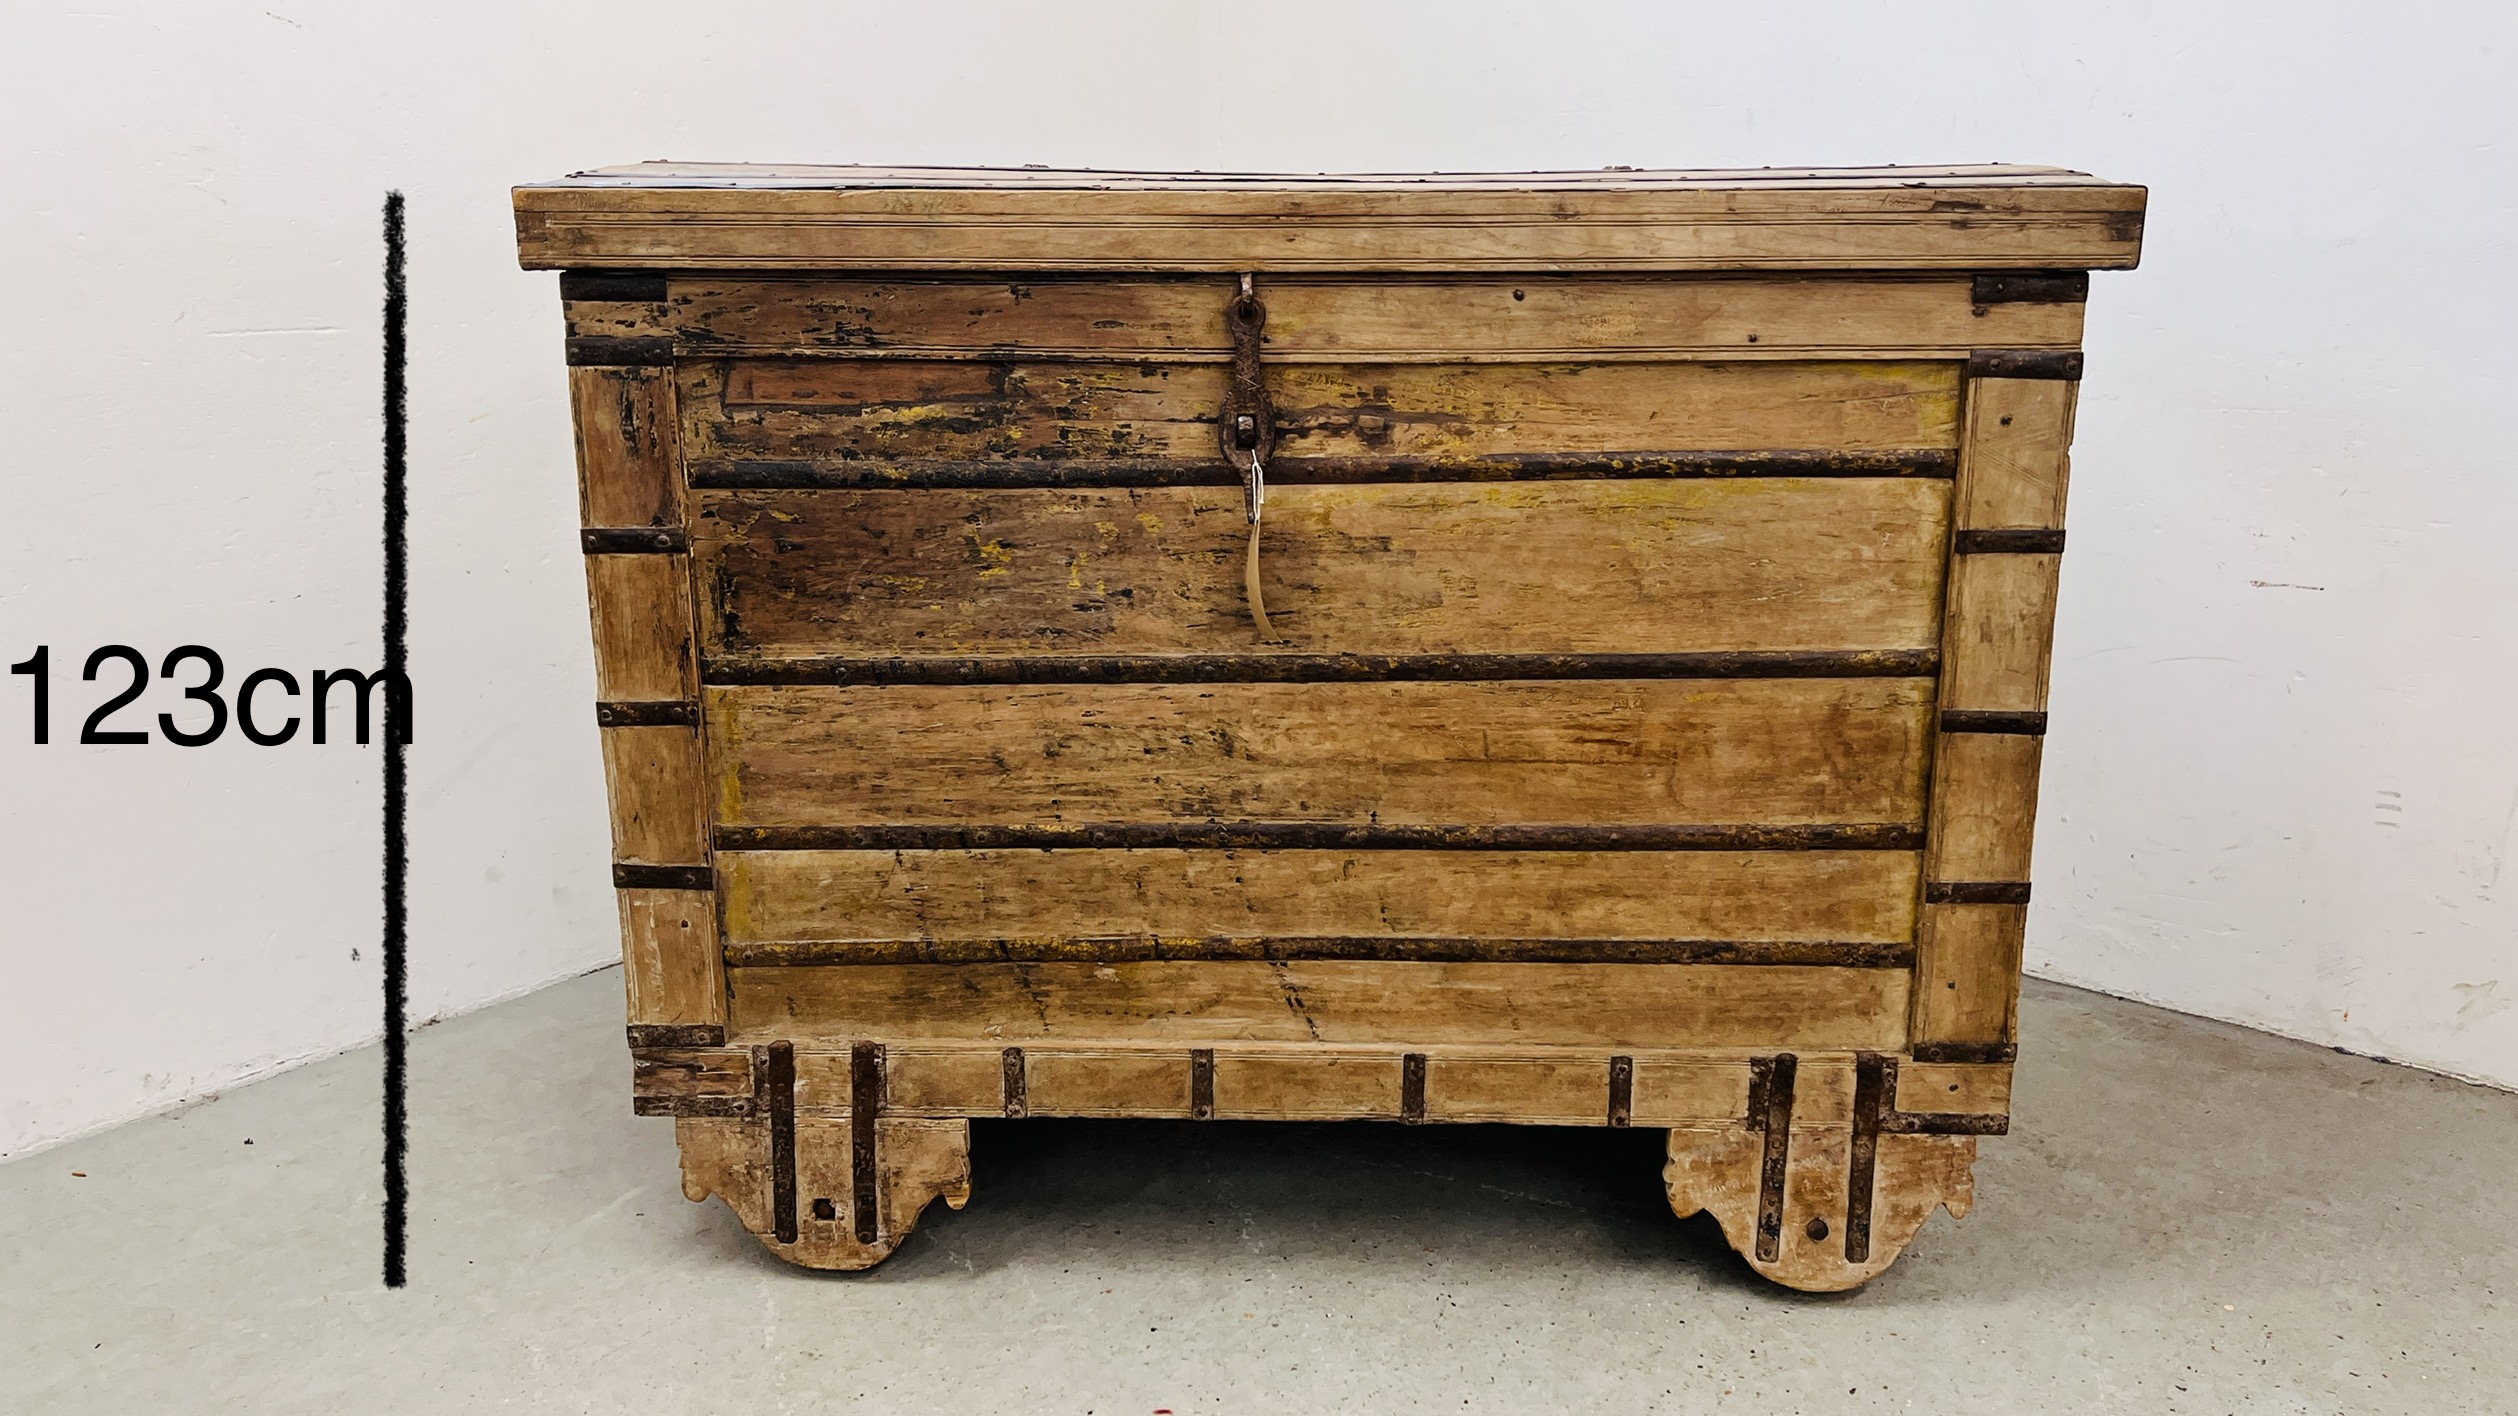 AN EXTREMELY LARGE RAJASTHANI 19th CENTURY DOWRY CHEST - 158CM W X 81CM D X 123CM H. - Image 2 of 30